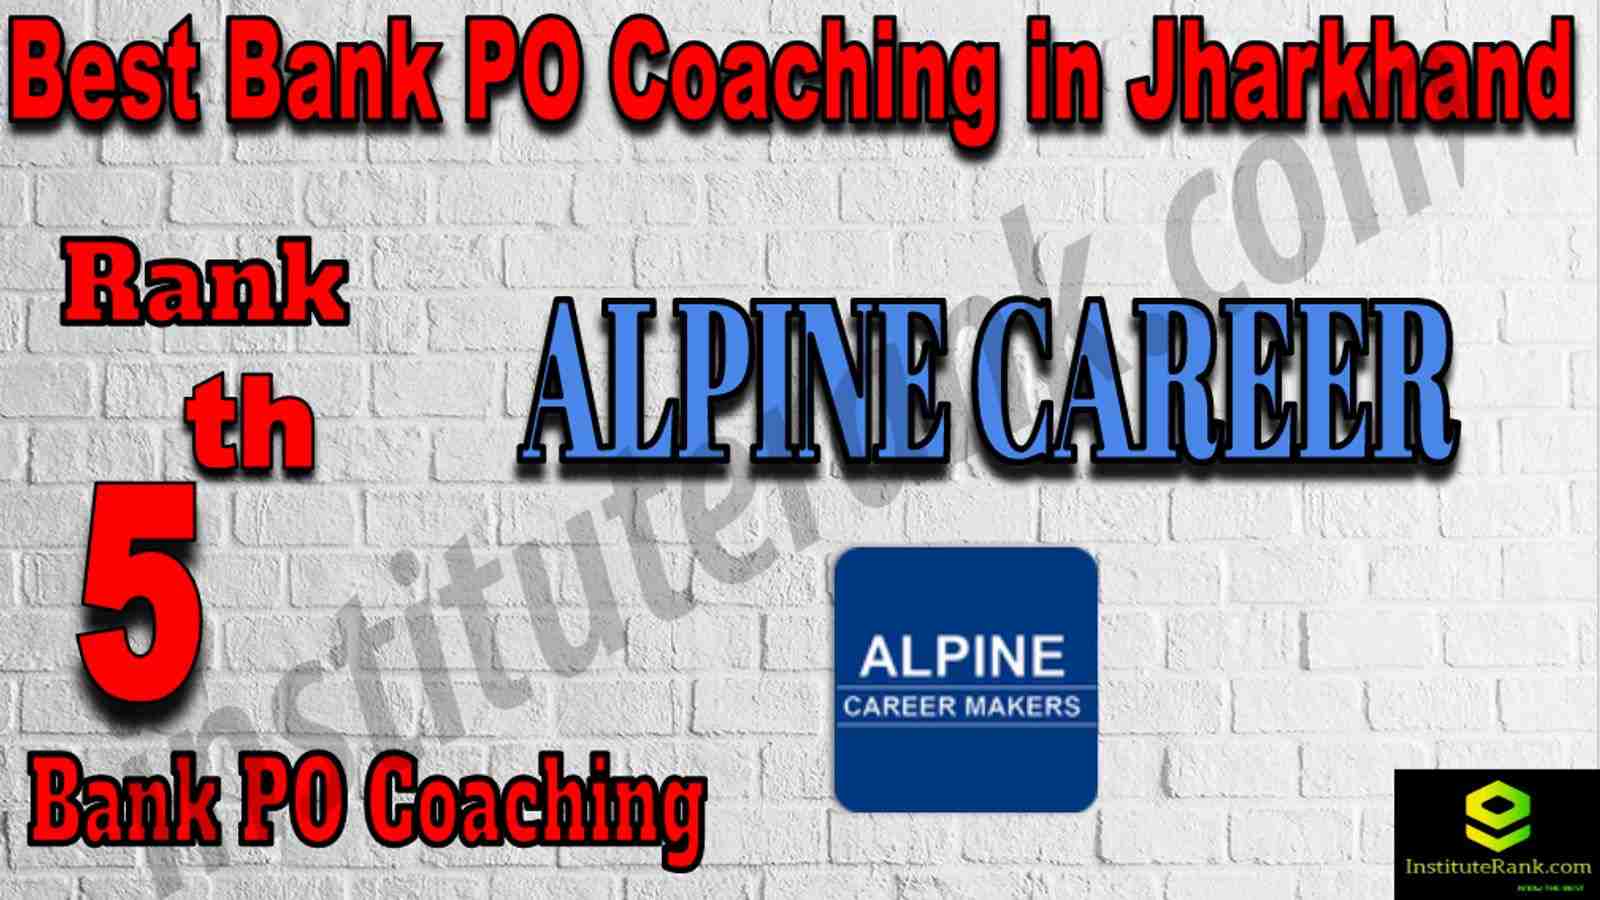 5th Best Bank PO Coaching in Jharkhand